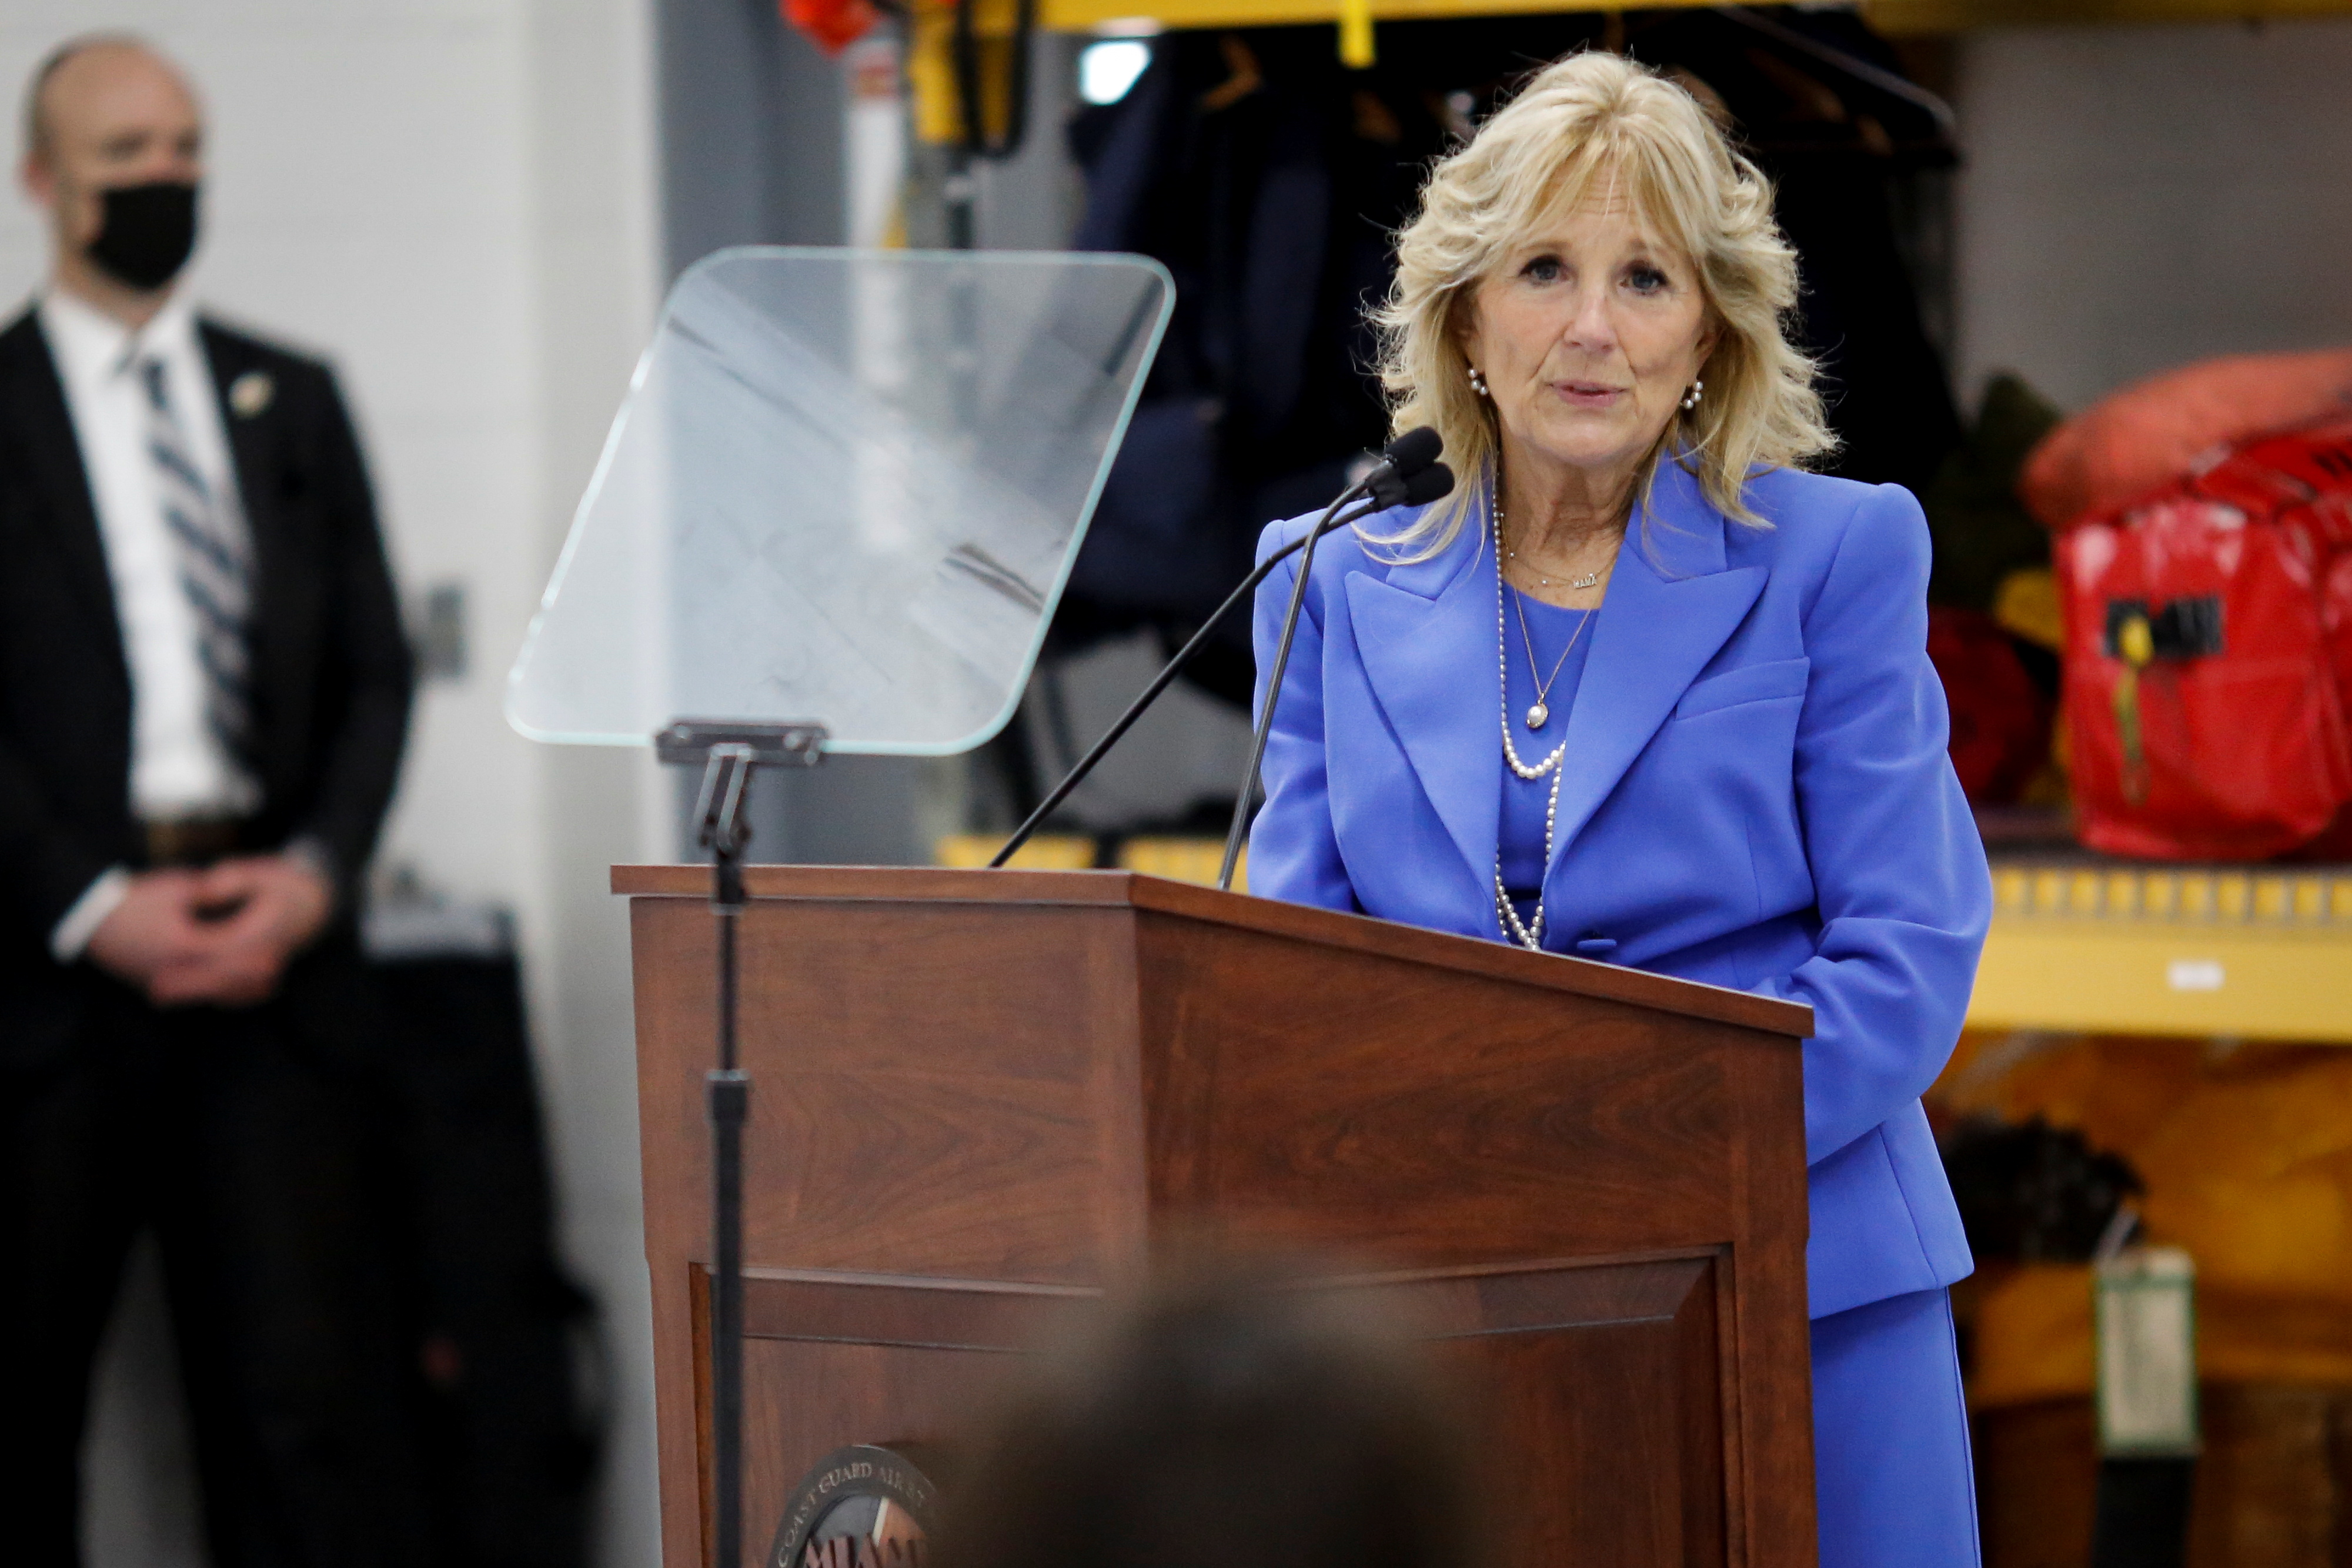 U.S. First Lady Jill Biden participates in a closed discussion and book reading event with U.S. military families and Blue Star families in Opa-Locka